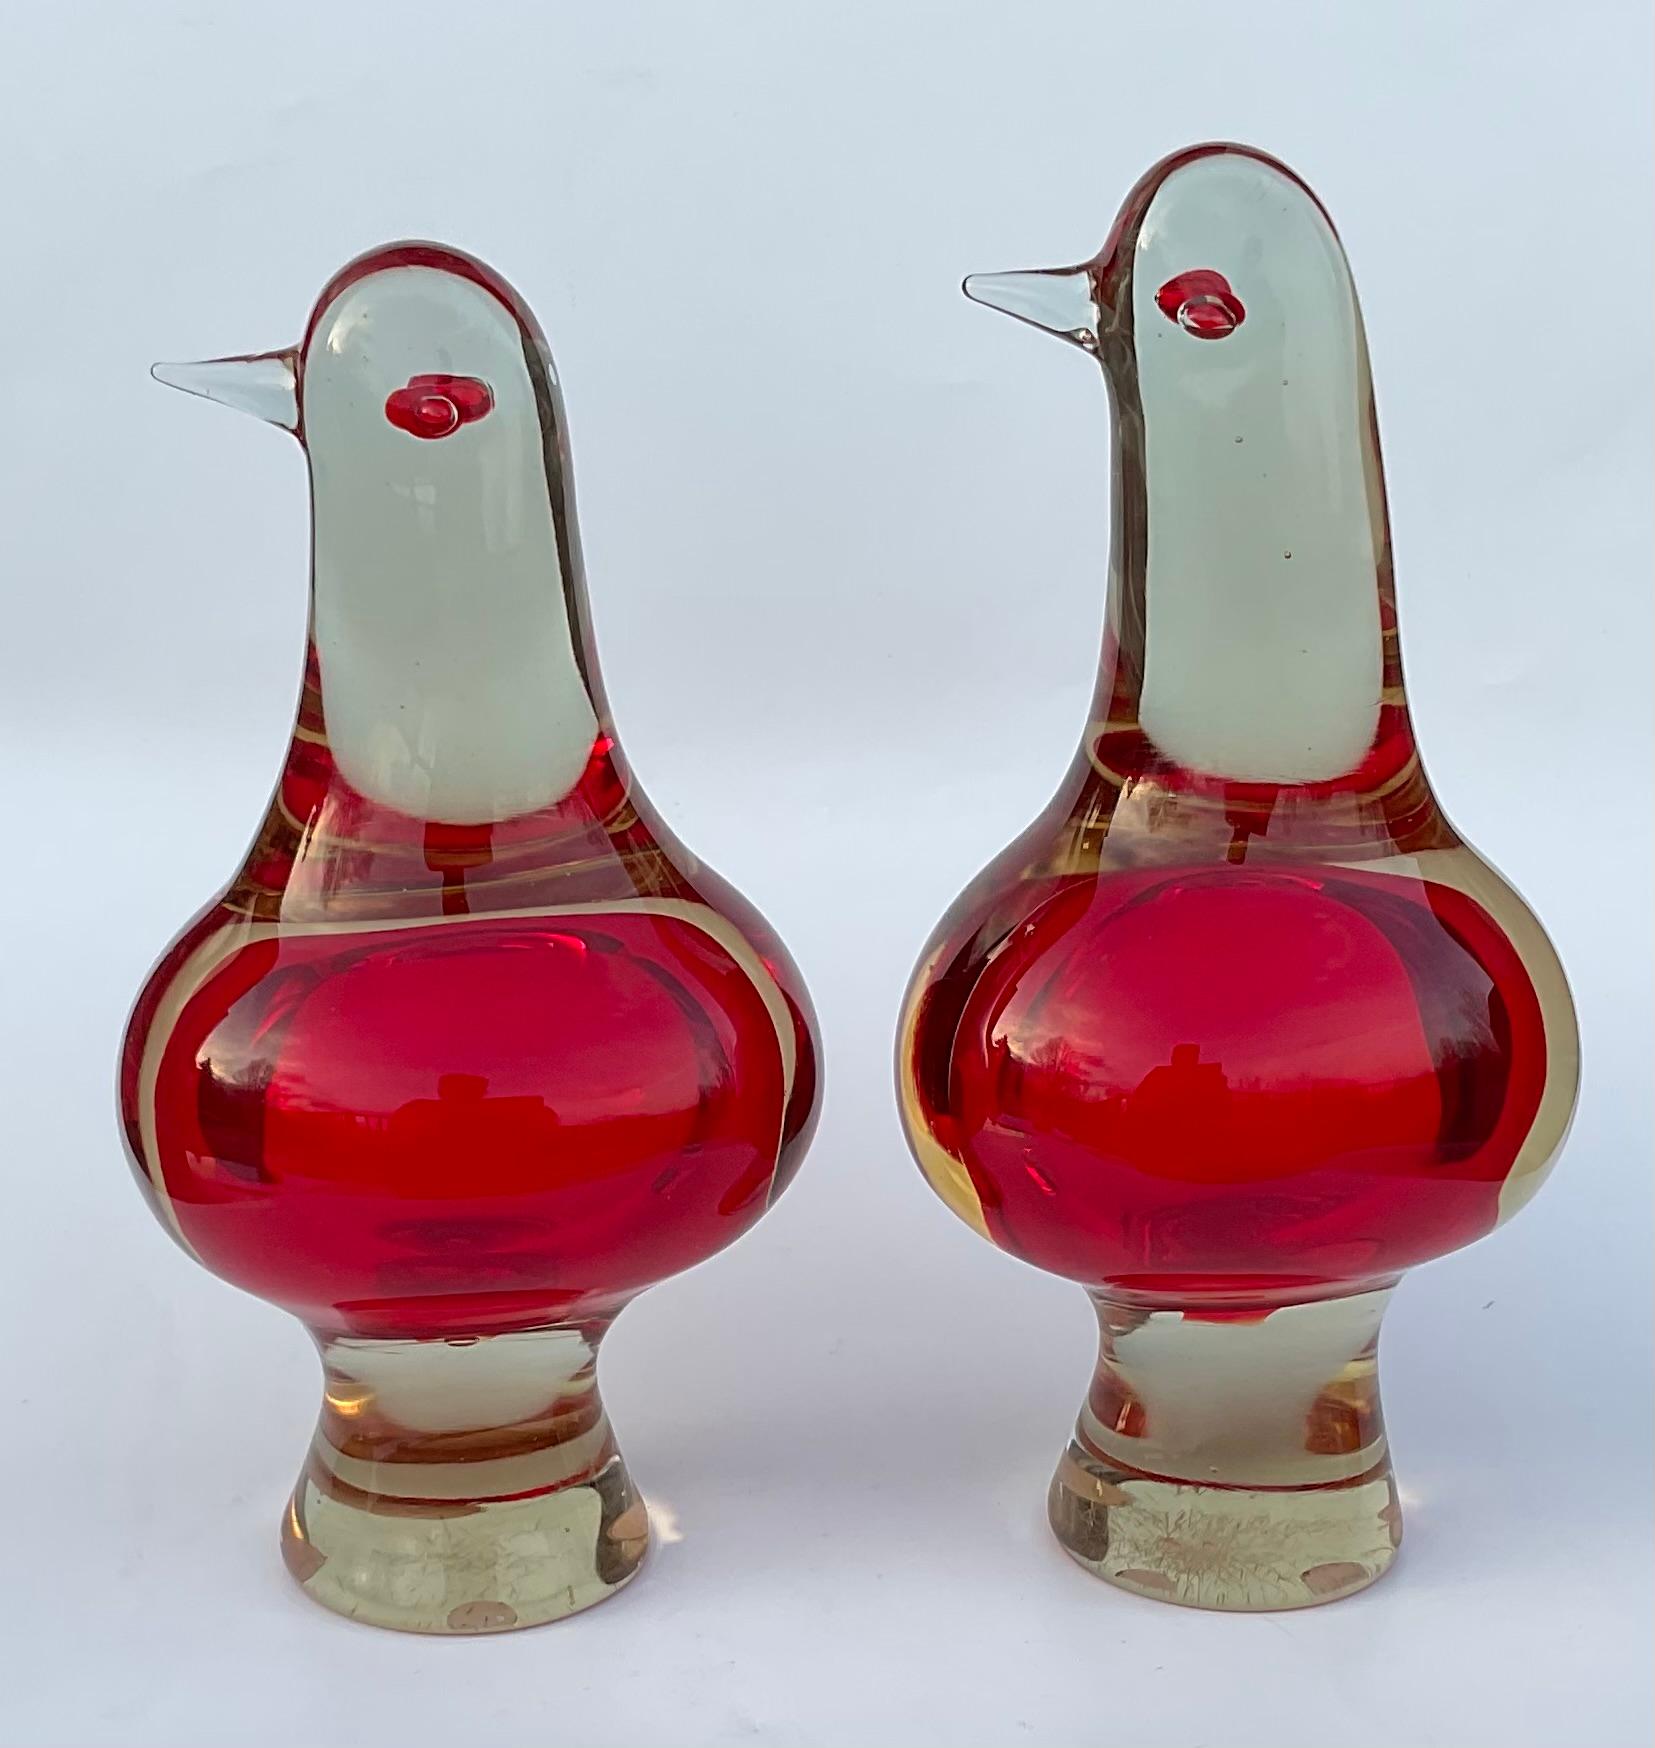 Italian PAIR Large Antonio da Ros Cenedese Murano Sommerso Glass Figures Birds in Red For Sale